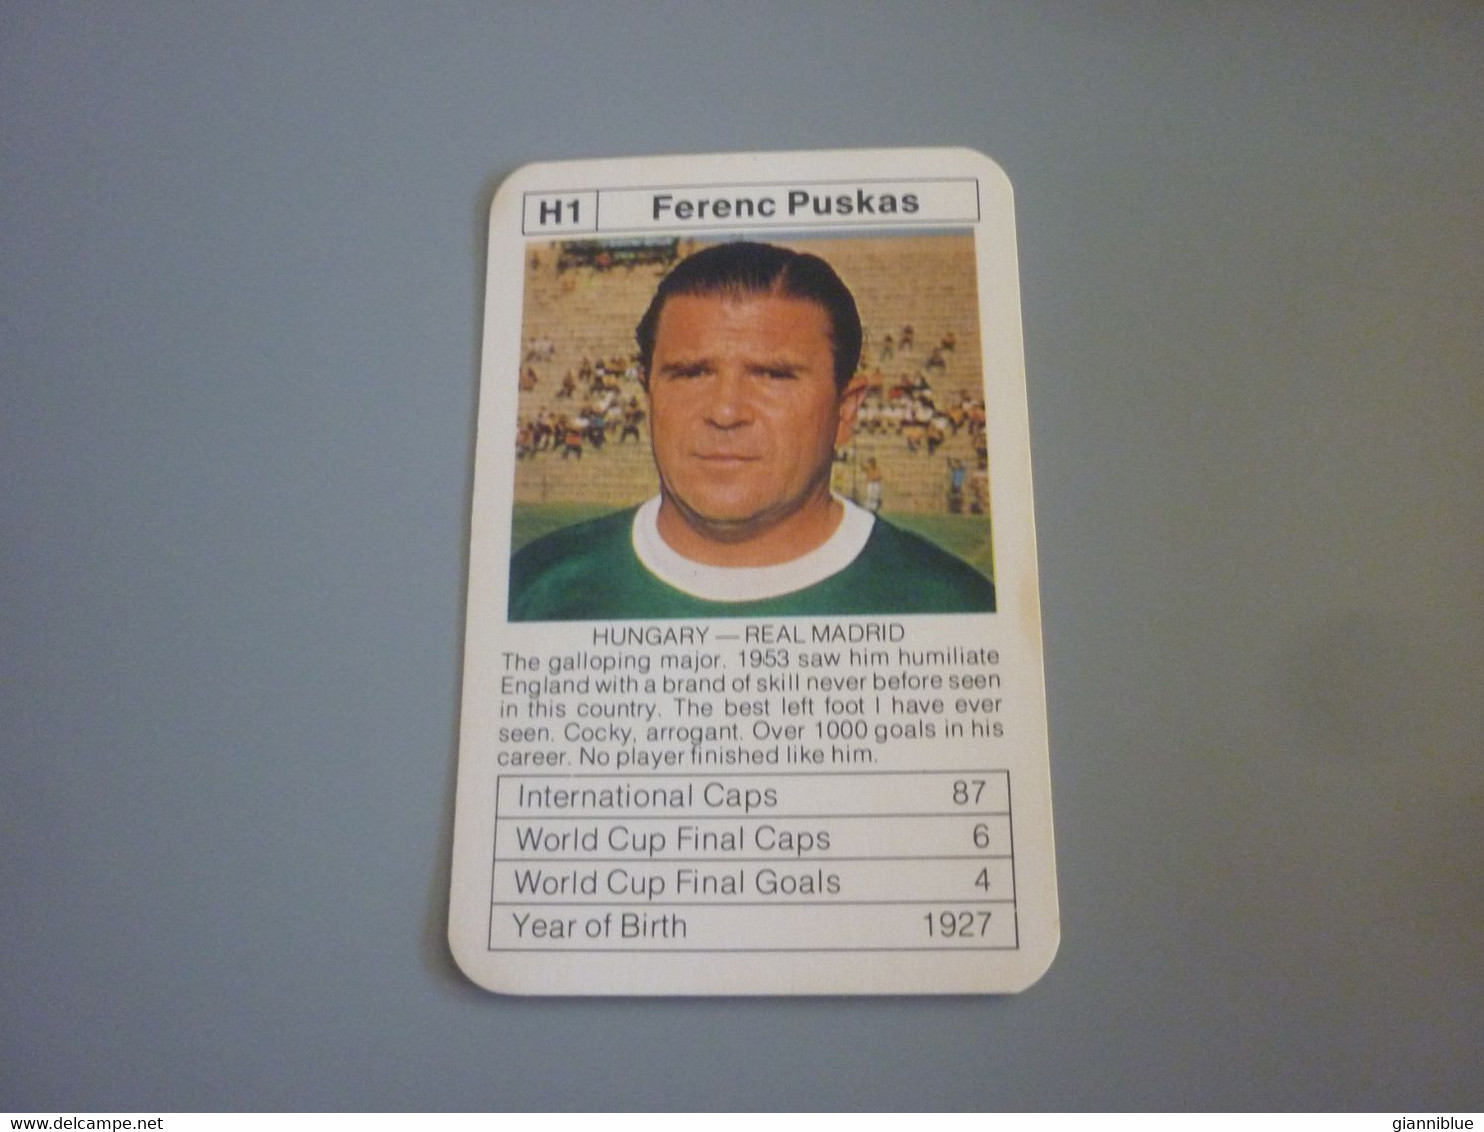 Trading Cards - Ferenc Puskas Real Madrid Hungary Hungarian Legend Football  Soccer Ace Sporting Aces old trading card